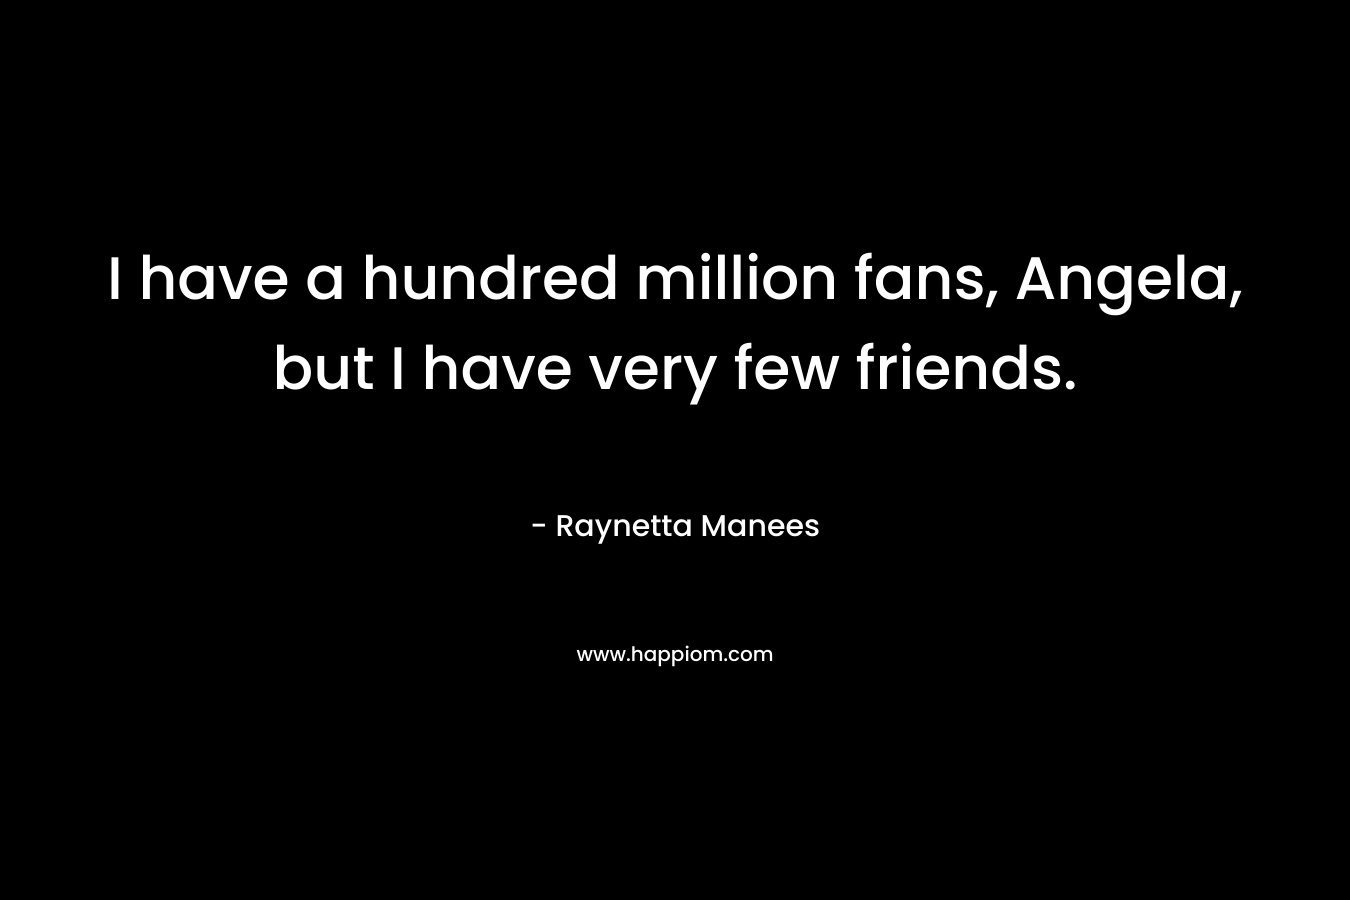 I have a hundred million fans, Angela, but I have very few friends.